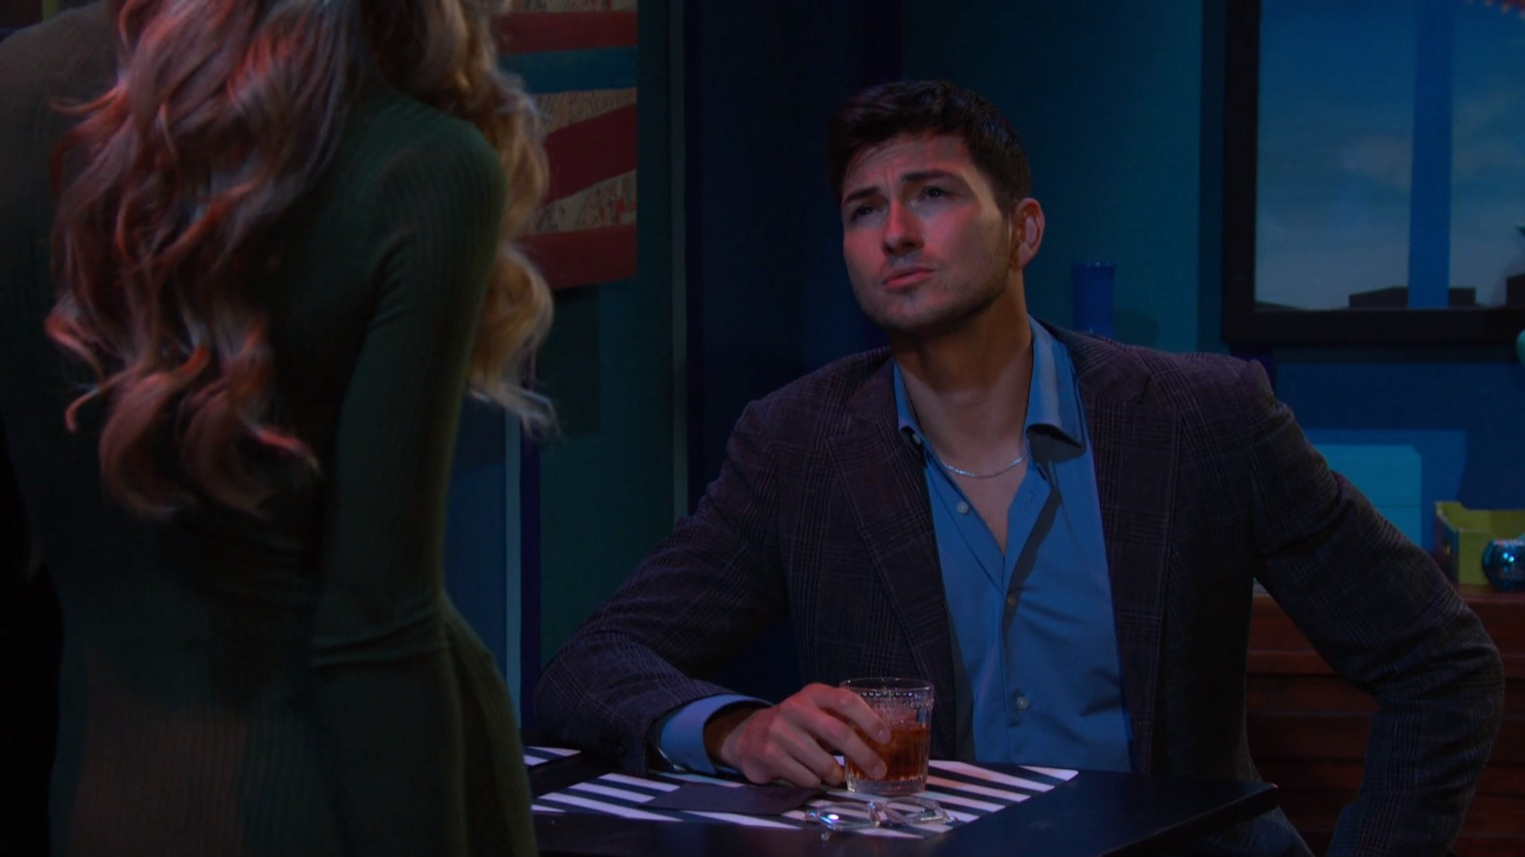 alex gets wasted small bar days of our lives recap